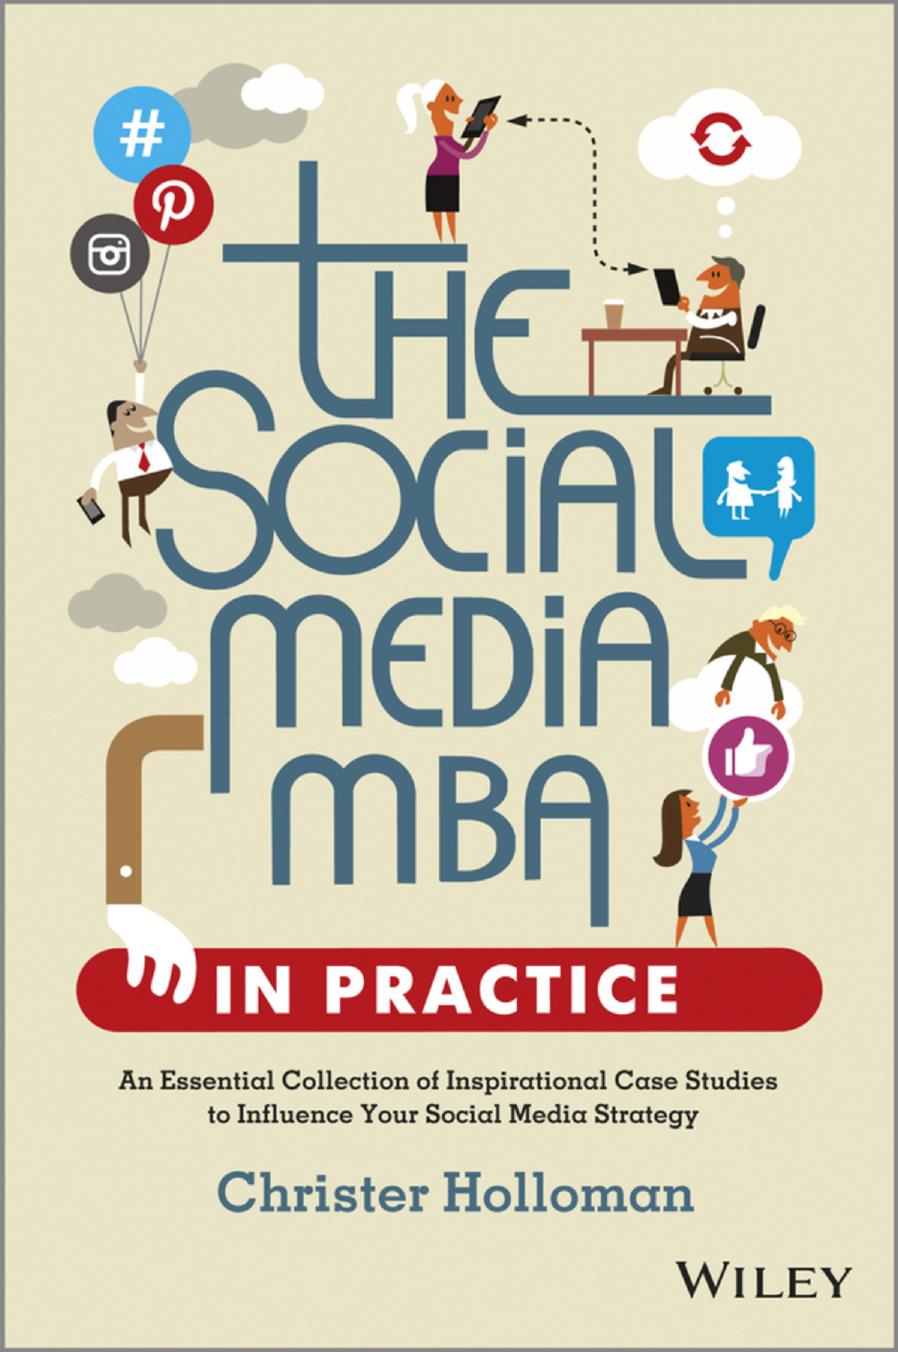 The Social Media MBA in Practice : An Essential Collection of Inspirational Case Studies to Influence Your Social Media Strategy by Christer Holloman